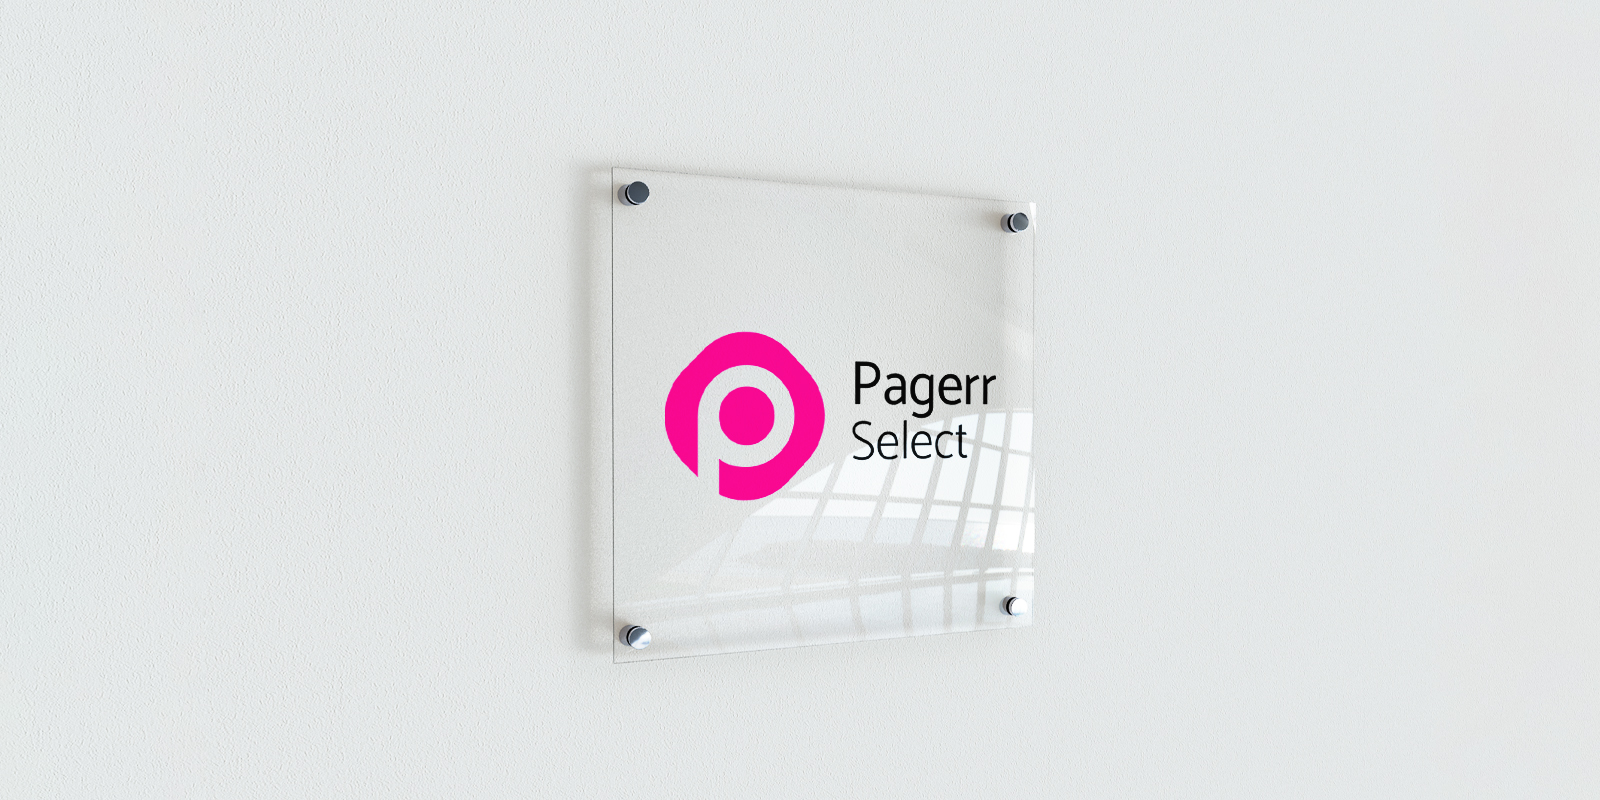 Acrylic signs in Berlin - Print with Pagerr